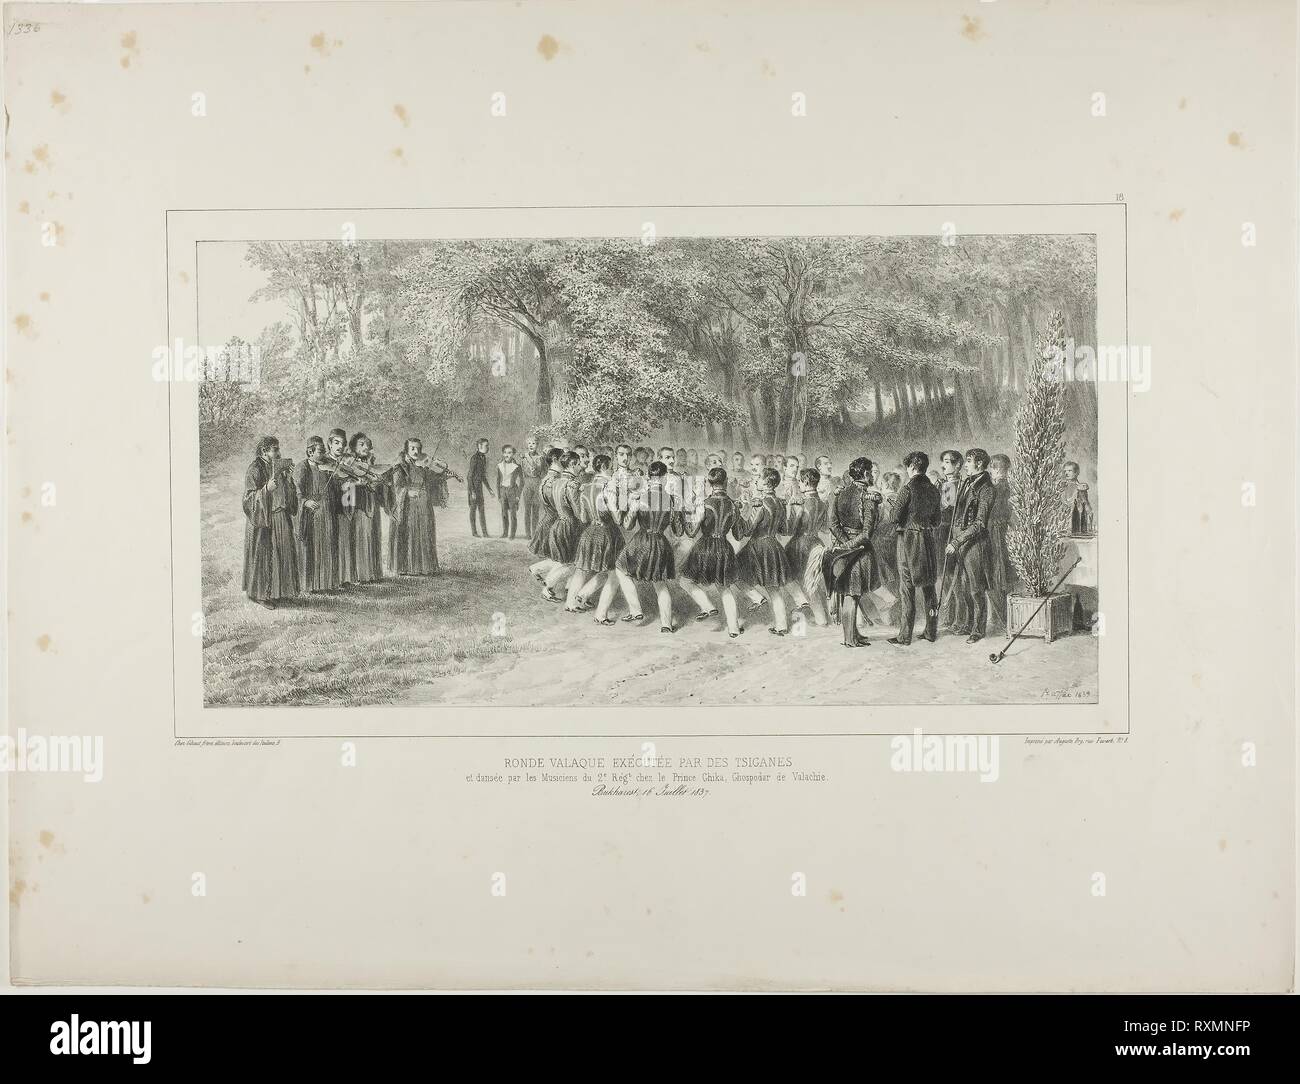 Wallachian Round, Performed by the Tsiganes and Danced by the Second Regiment Musicians at the Home of Prince Ghika, Ghospodar, Wallachia. Denis Auguste Marie Raffet (French, 1804-1860); printed by Auguste Bry (French, 19th century); published by Chez Gihaut Frères (French, 19th century). Date: 1839. Dimensions: 166 × 318 mm (image); 166 × 318 mm (primary support); 357 × 458 mm (secondary support). Lithograph in black on ivory chine laid down on ivory wove paper. Origin: France. Museum: The Chicago Art Institute. Stock Photo